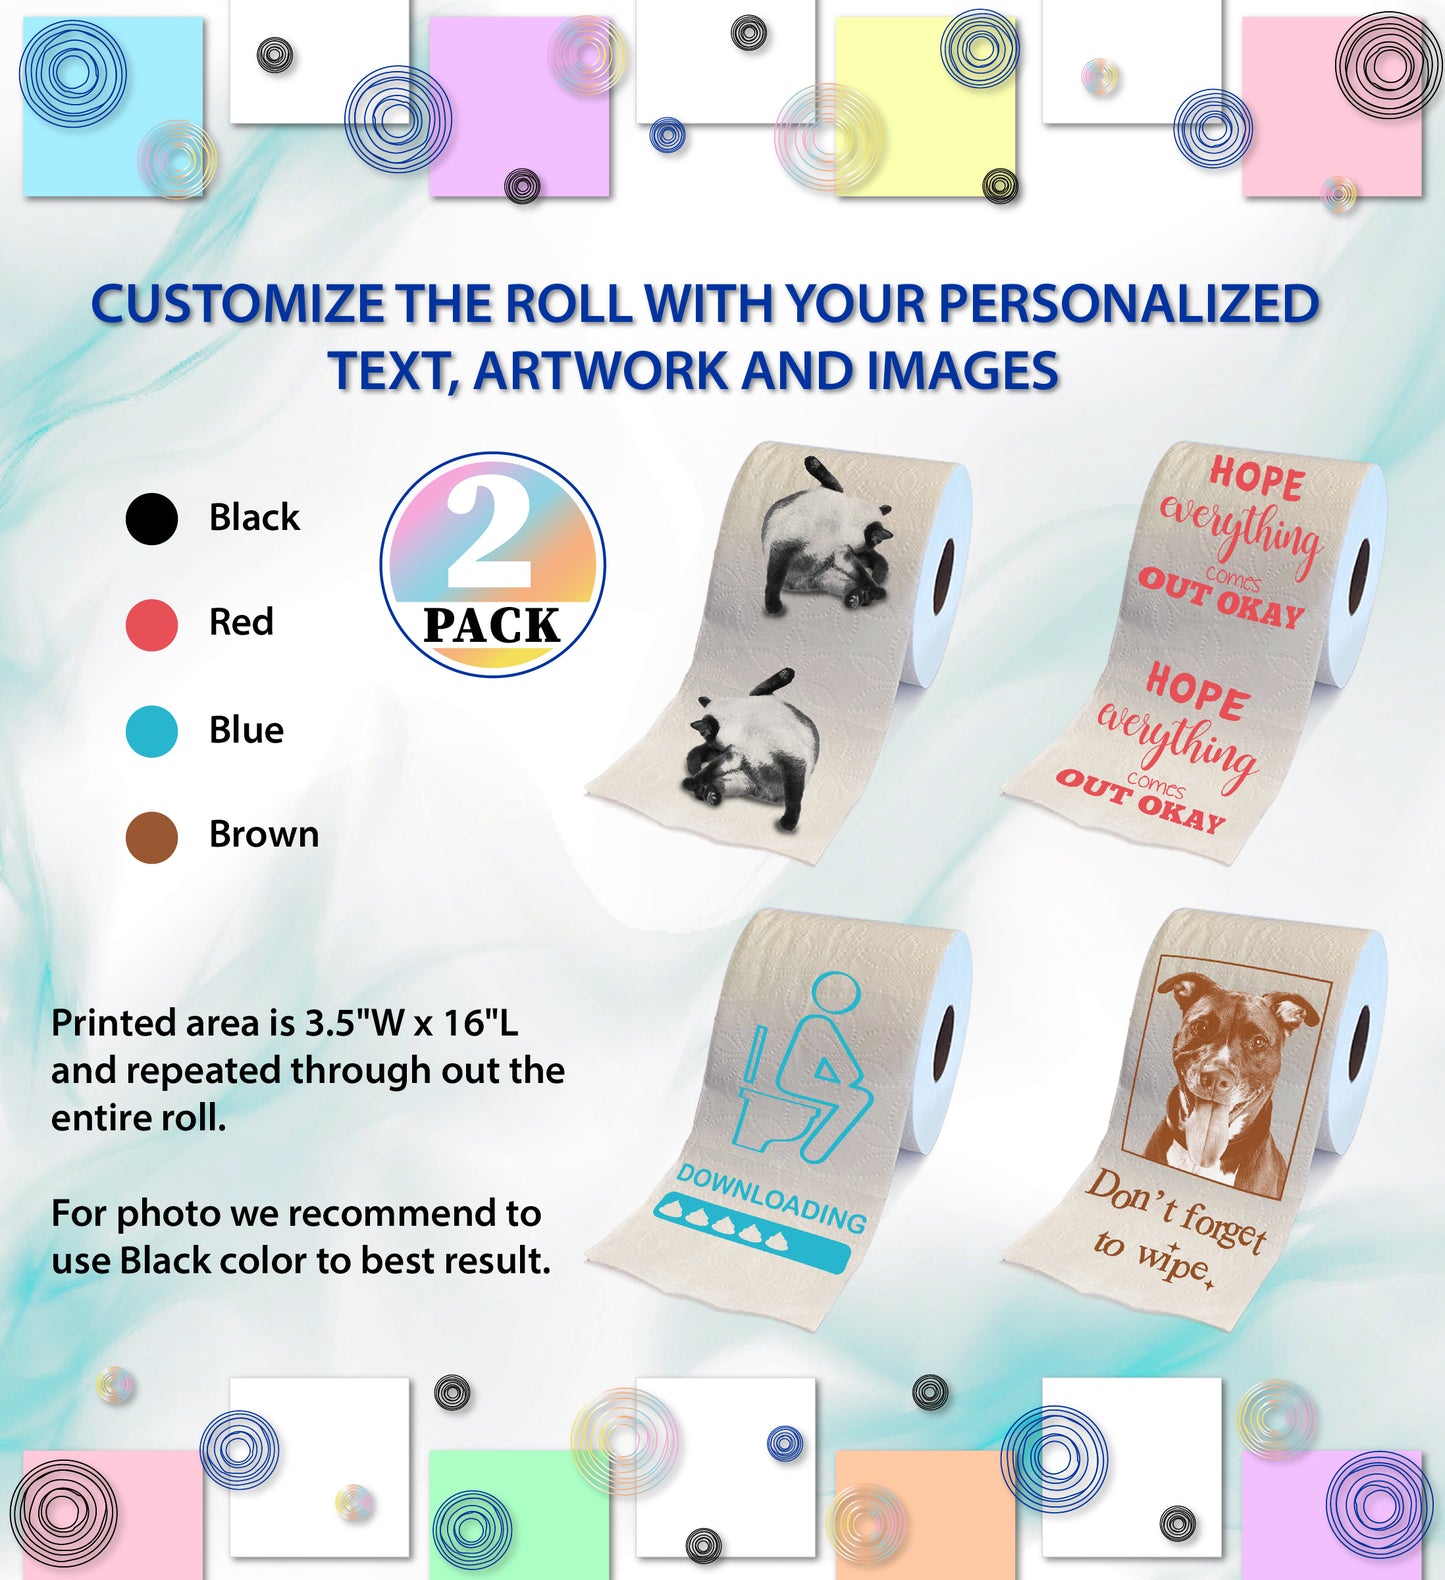 Printed TP Wholesale Toilet Paper Roll Gag Gift Decor - 500 sheets - 2 INK COLORS (Individually Shrink Wrapped - No Gift Box)